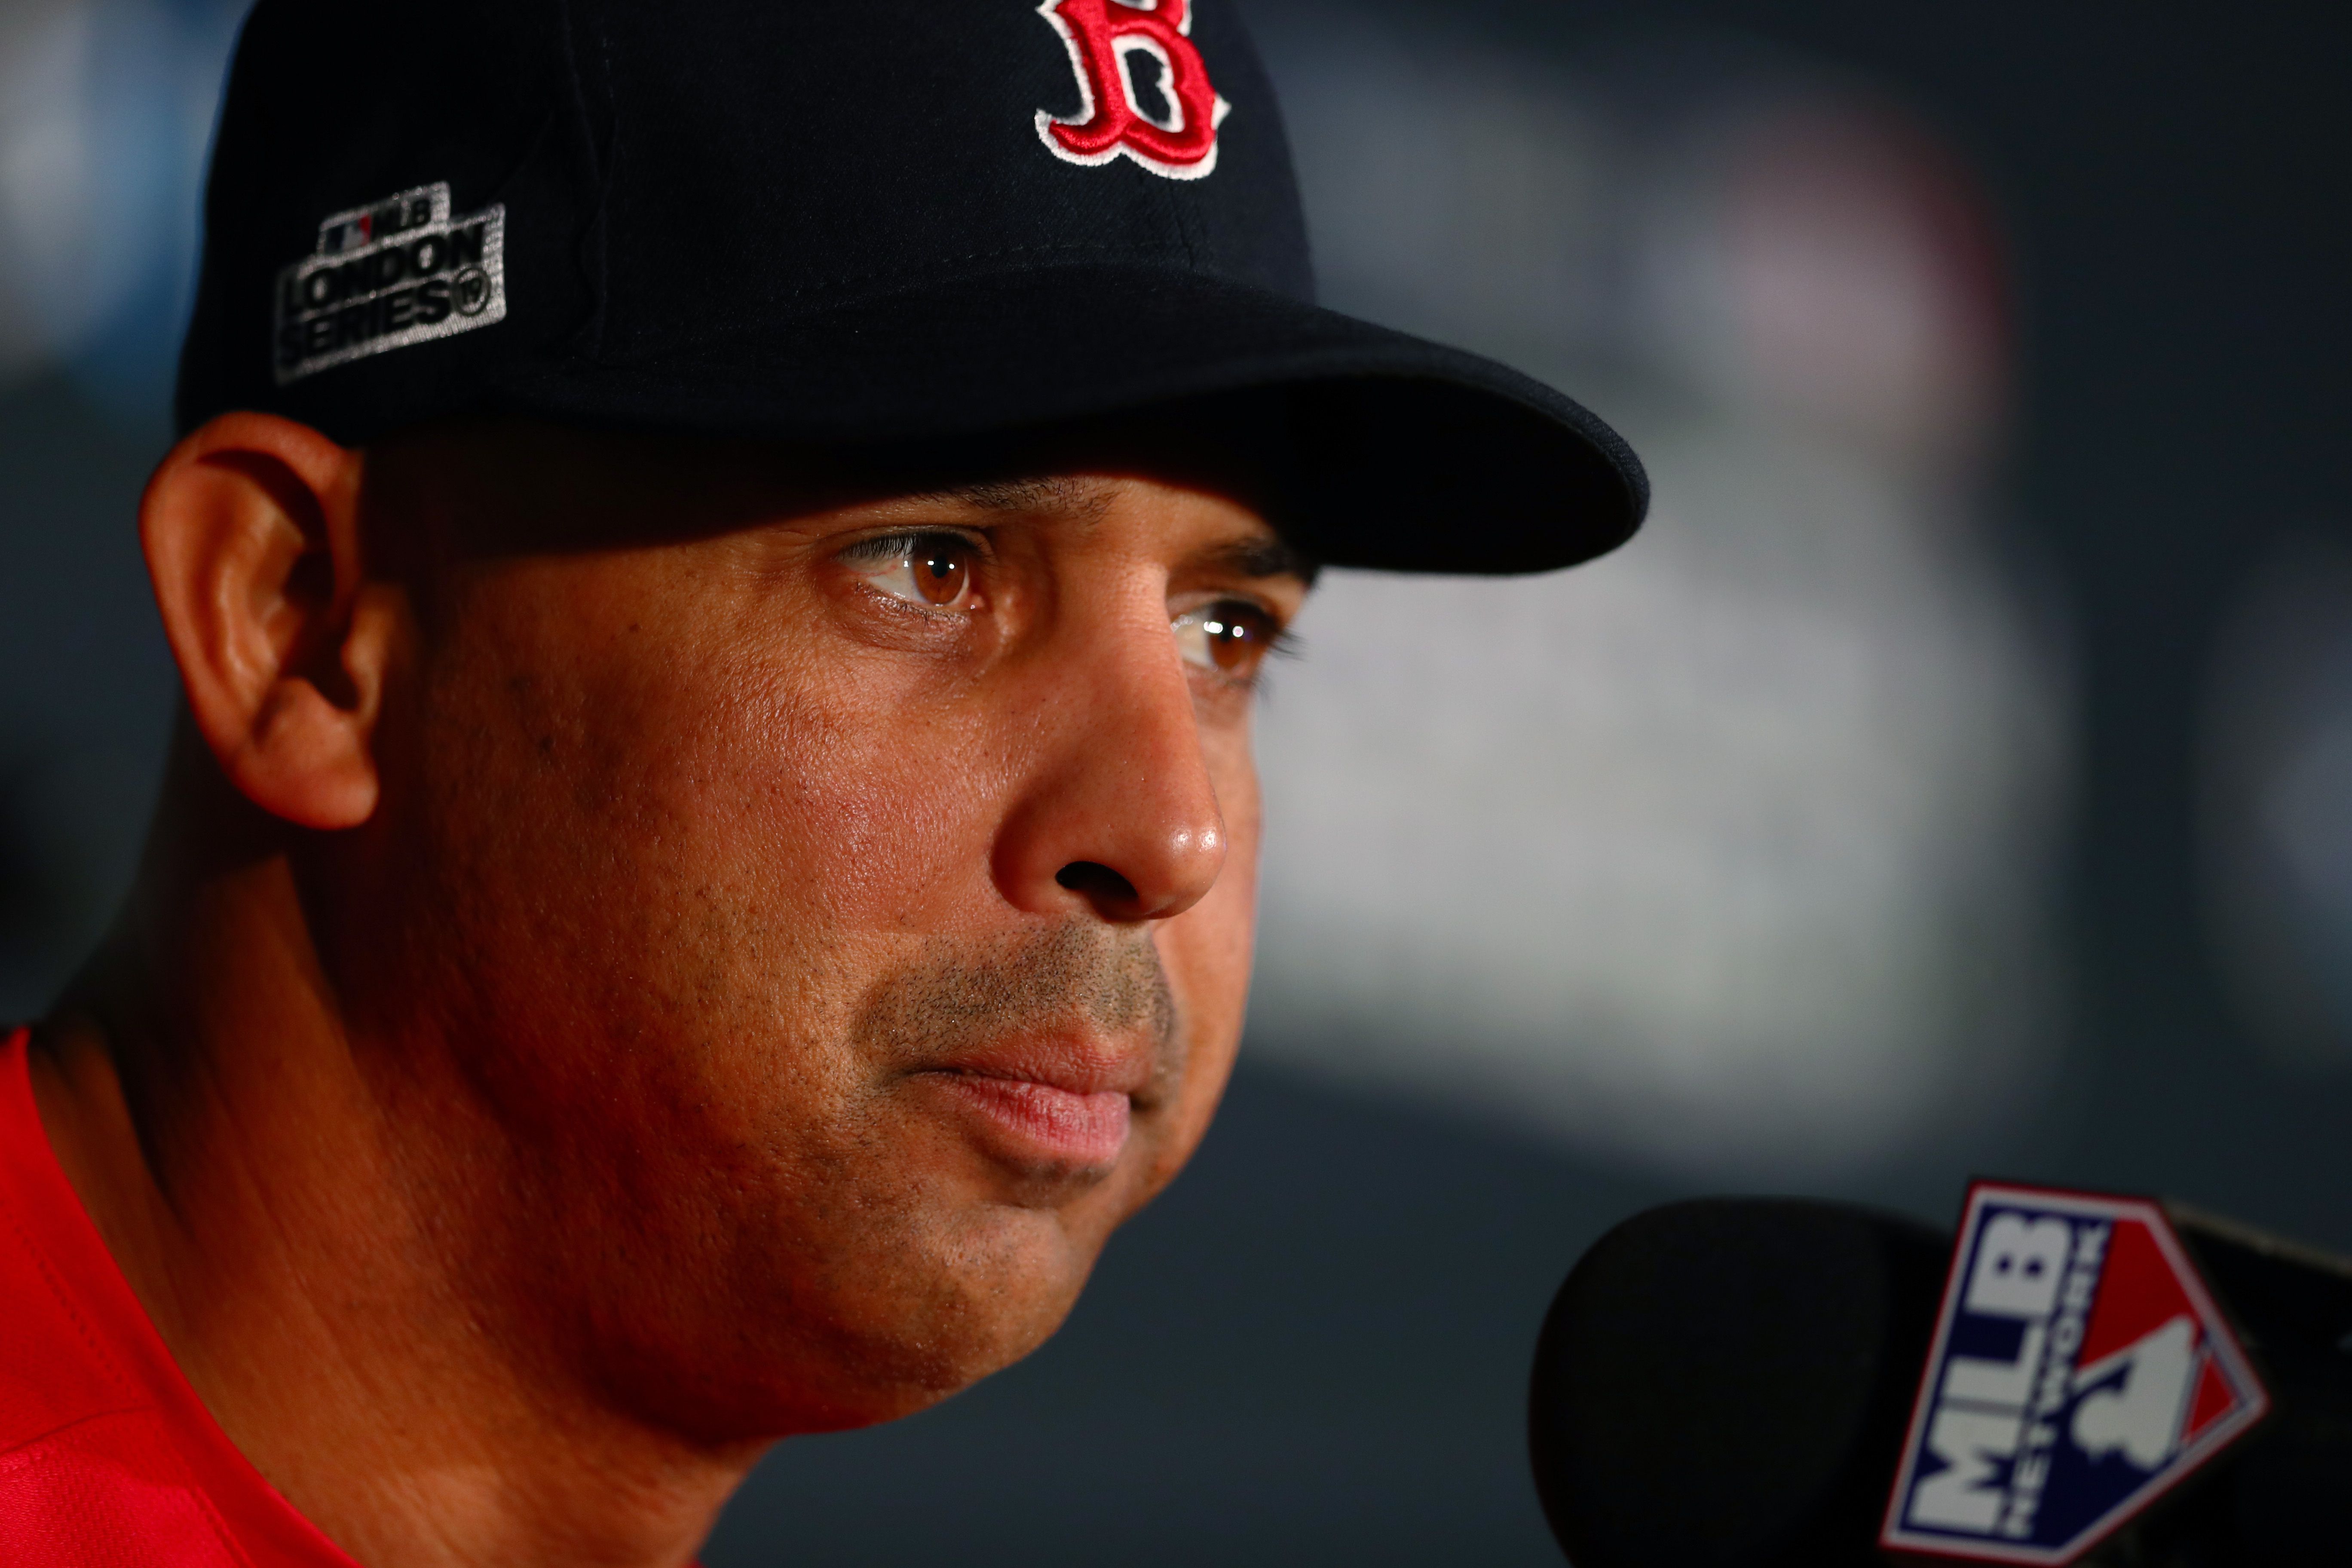 Red Sox manager Alex Cora fired in sign-stealing scandal - Los Angeles Times